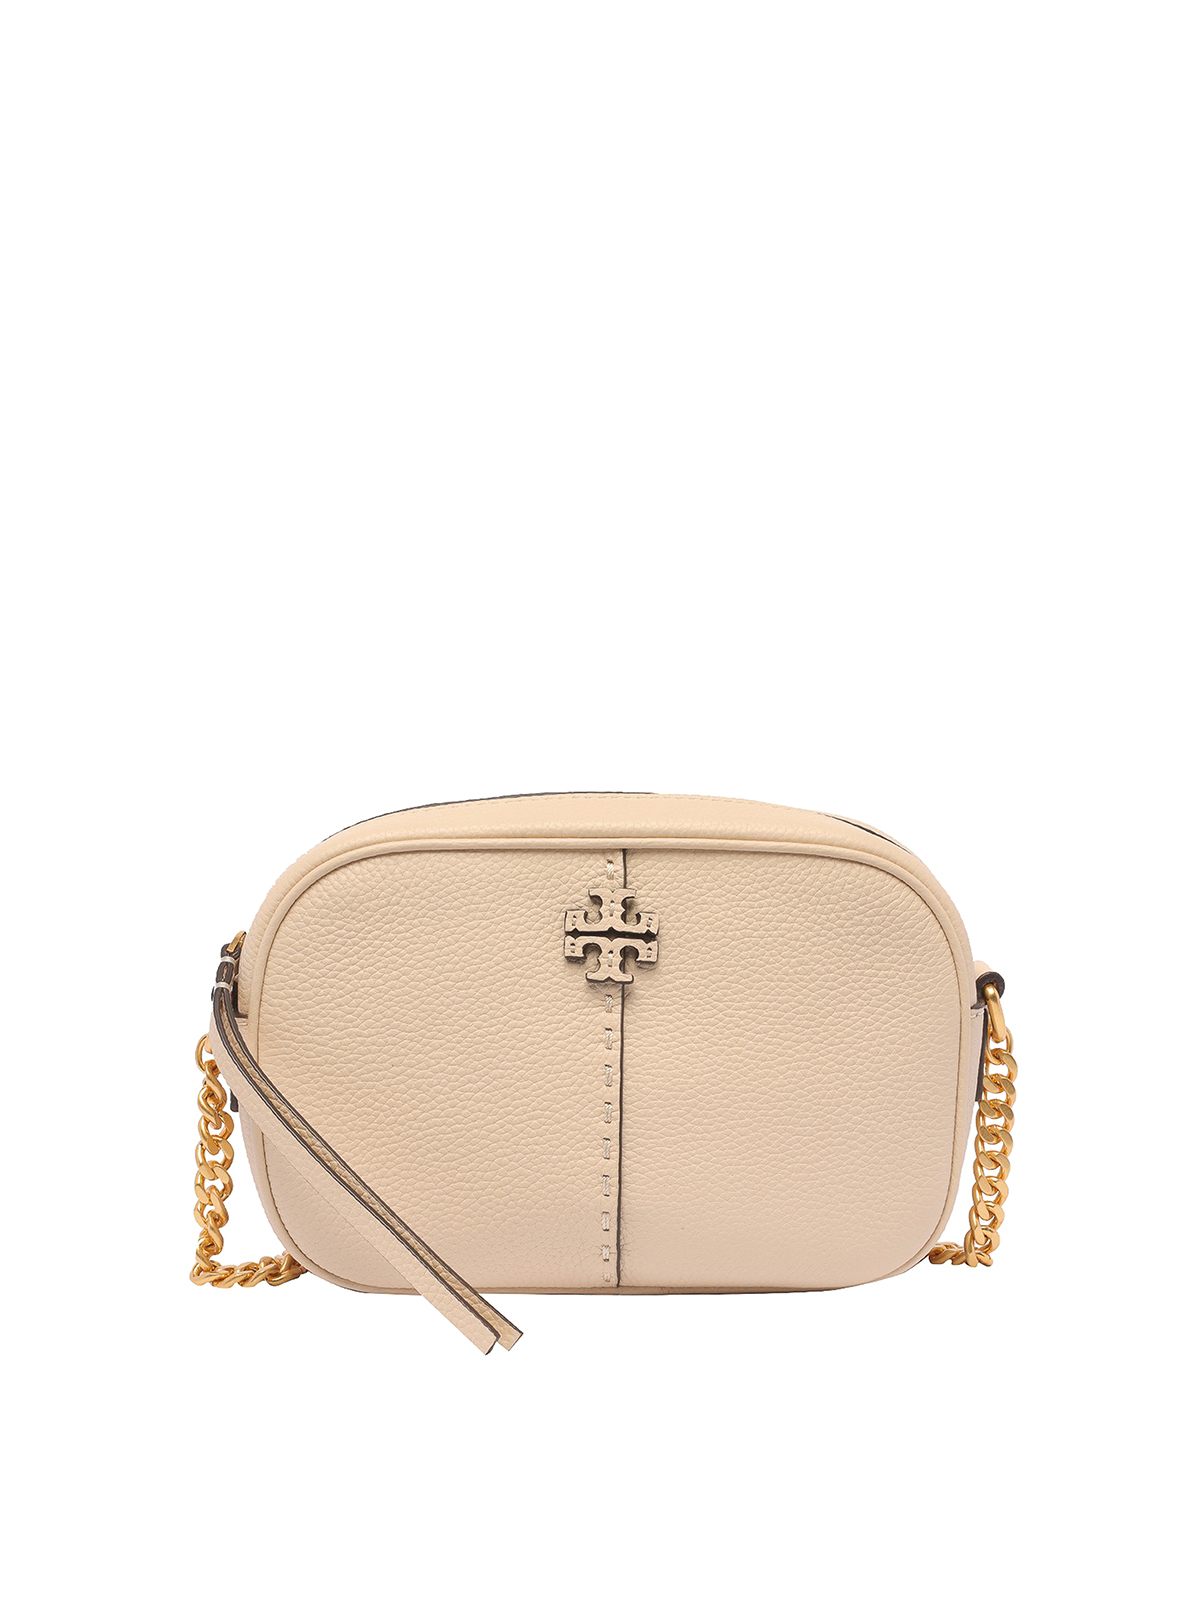 Tory Burch Embossed Logo Leather Camera Bag In Beige